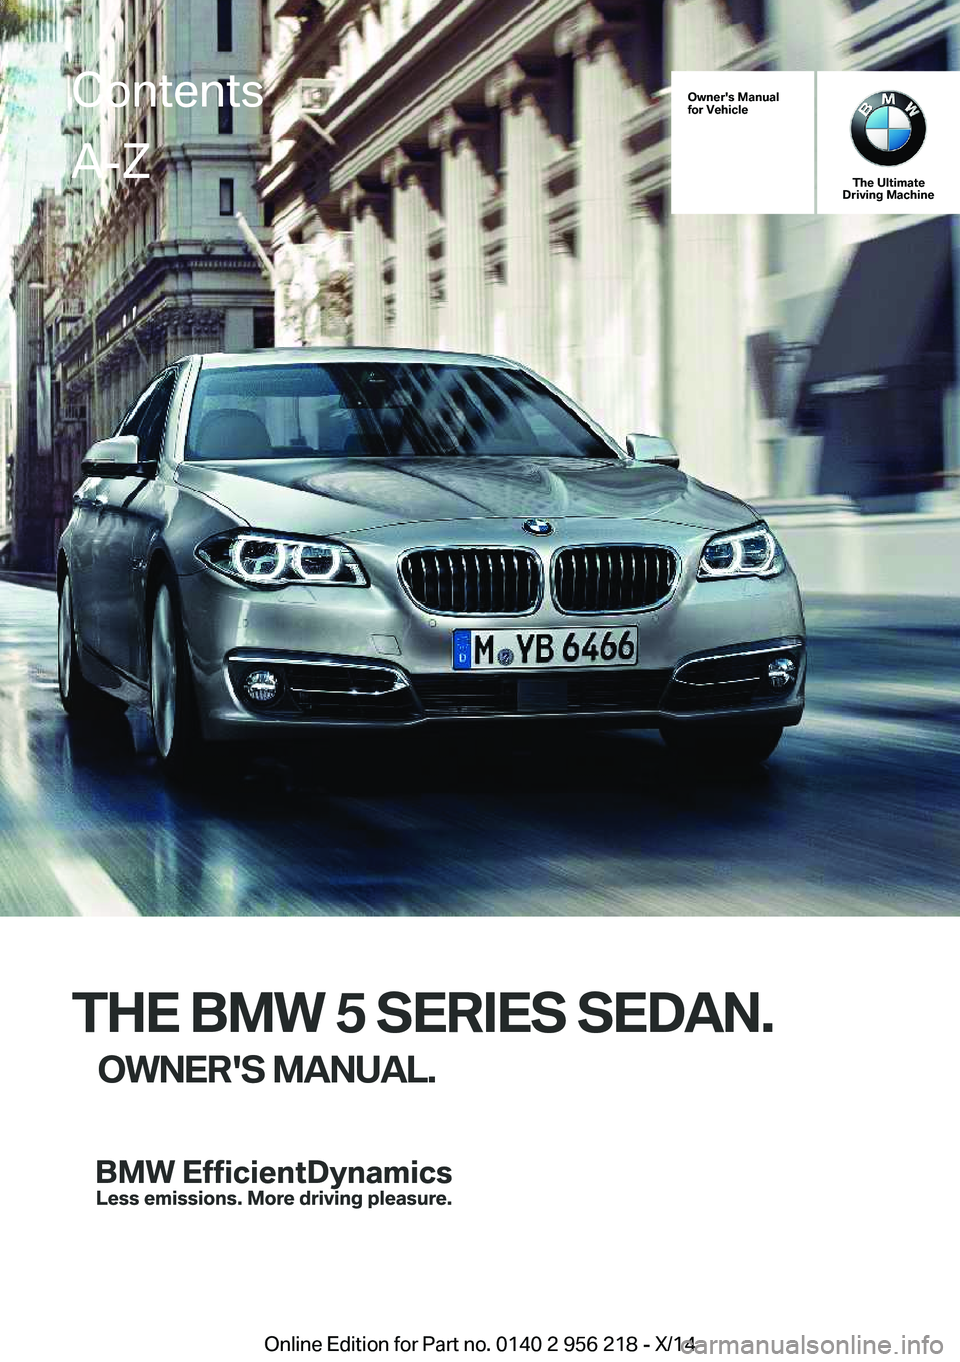 BMW 528I XDRIVE SEDAN 2014  Owners Manual Owner's Manual
for Vehicle
The Ultimate
Driving Machine
THE BMW 5 SERIES SEDAN.
OWNER'S MANUAL.
ContentsA-Z
Online Edition for Part no. 0140 2 956 218 - X/14   